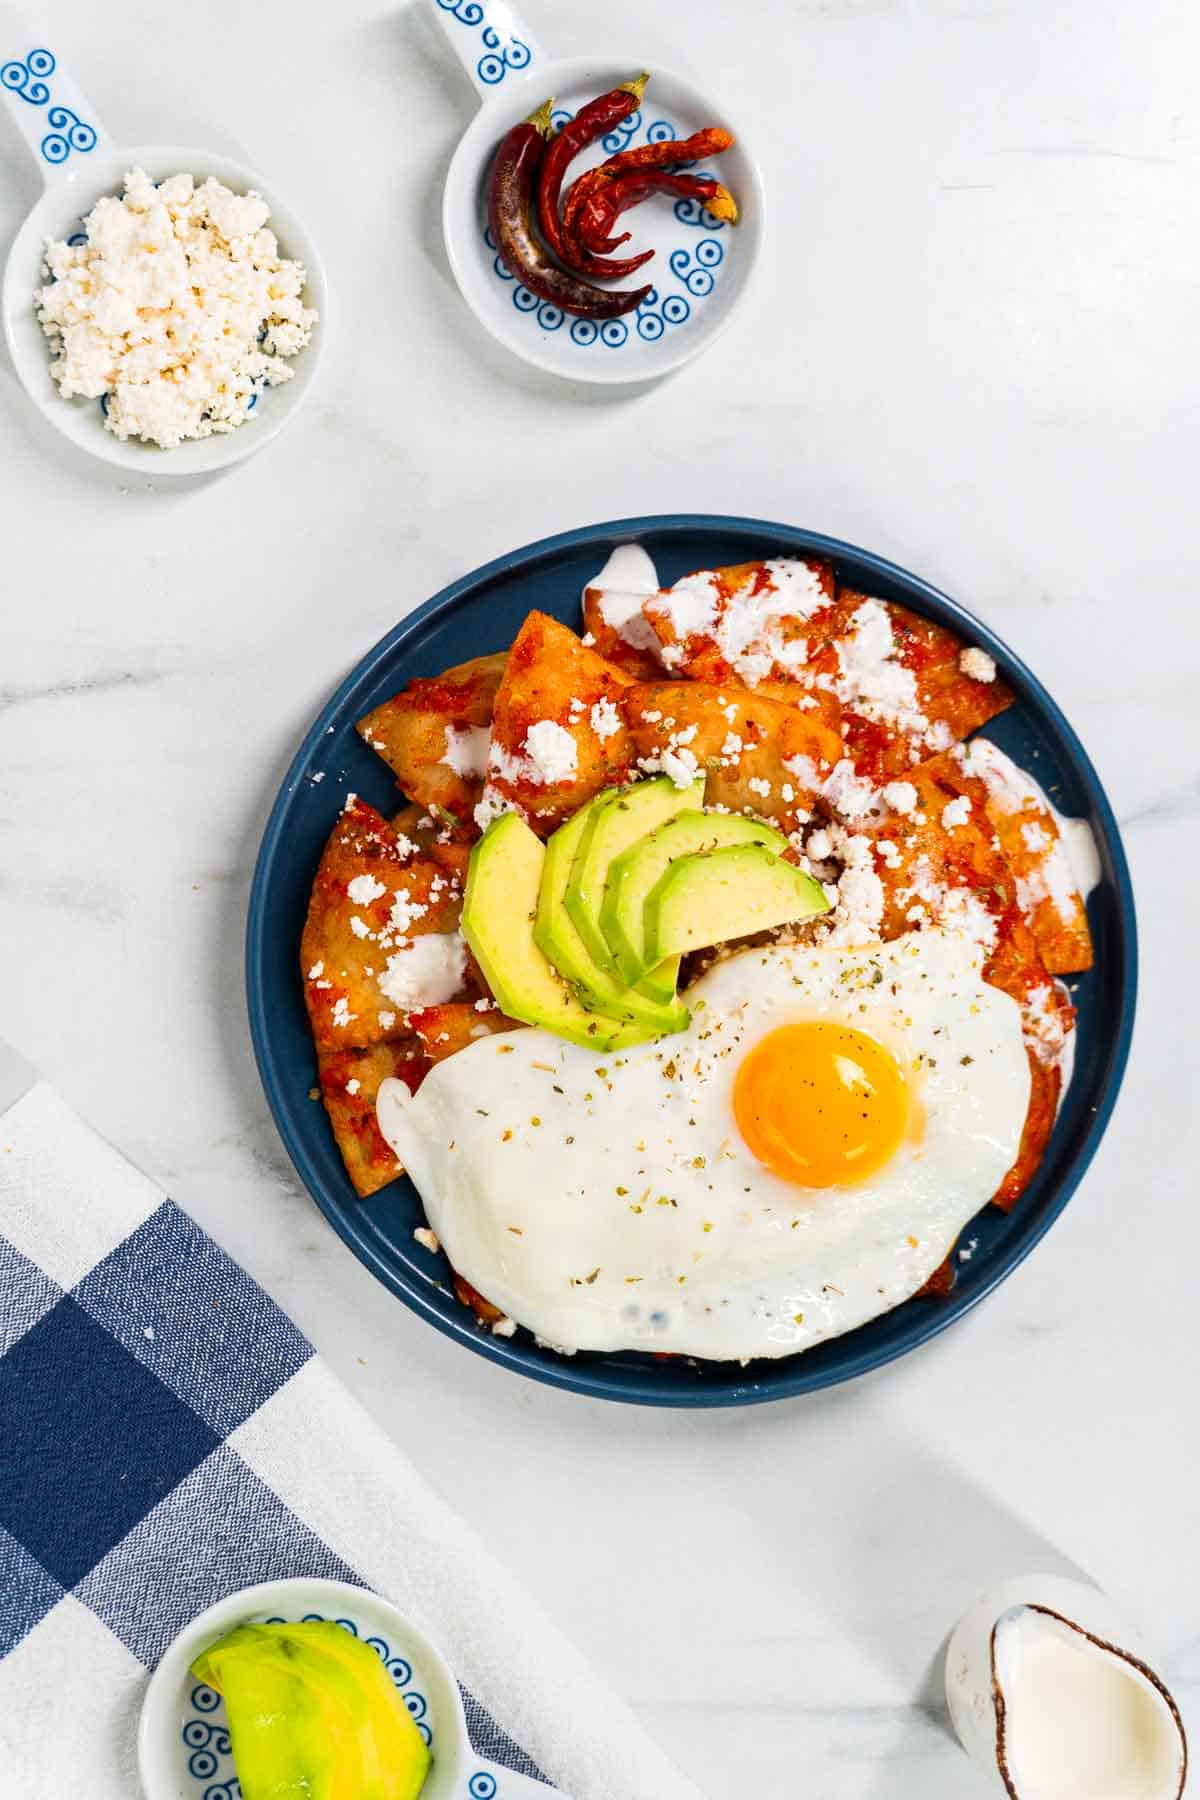 A plate of red chilaquiles, served with avocado, fried egg, Mexican crema, and queso fresco.